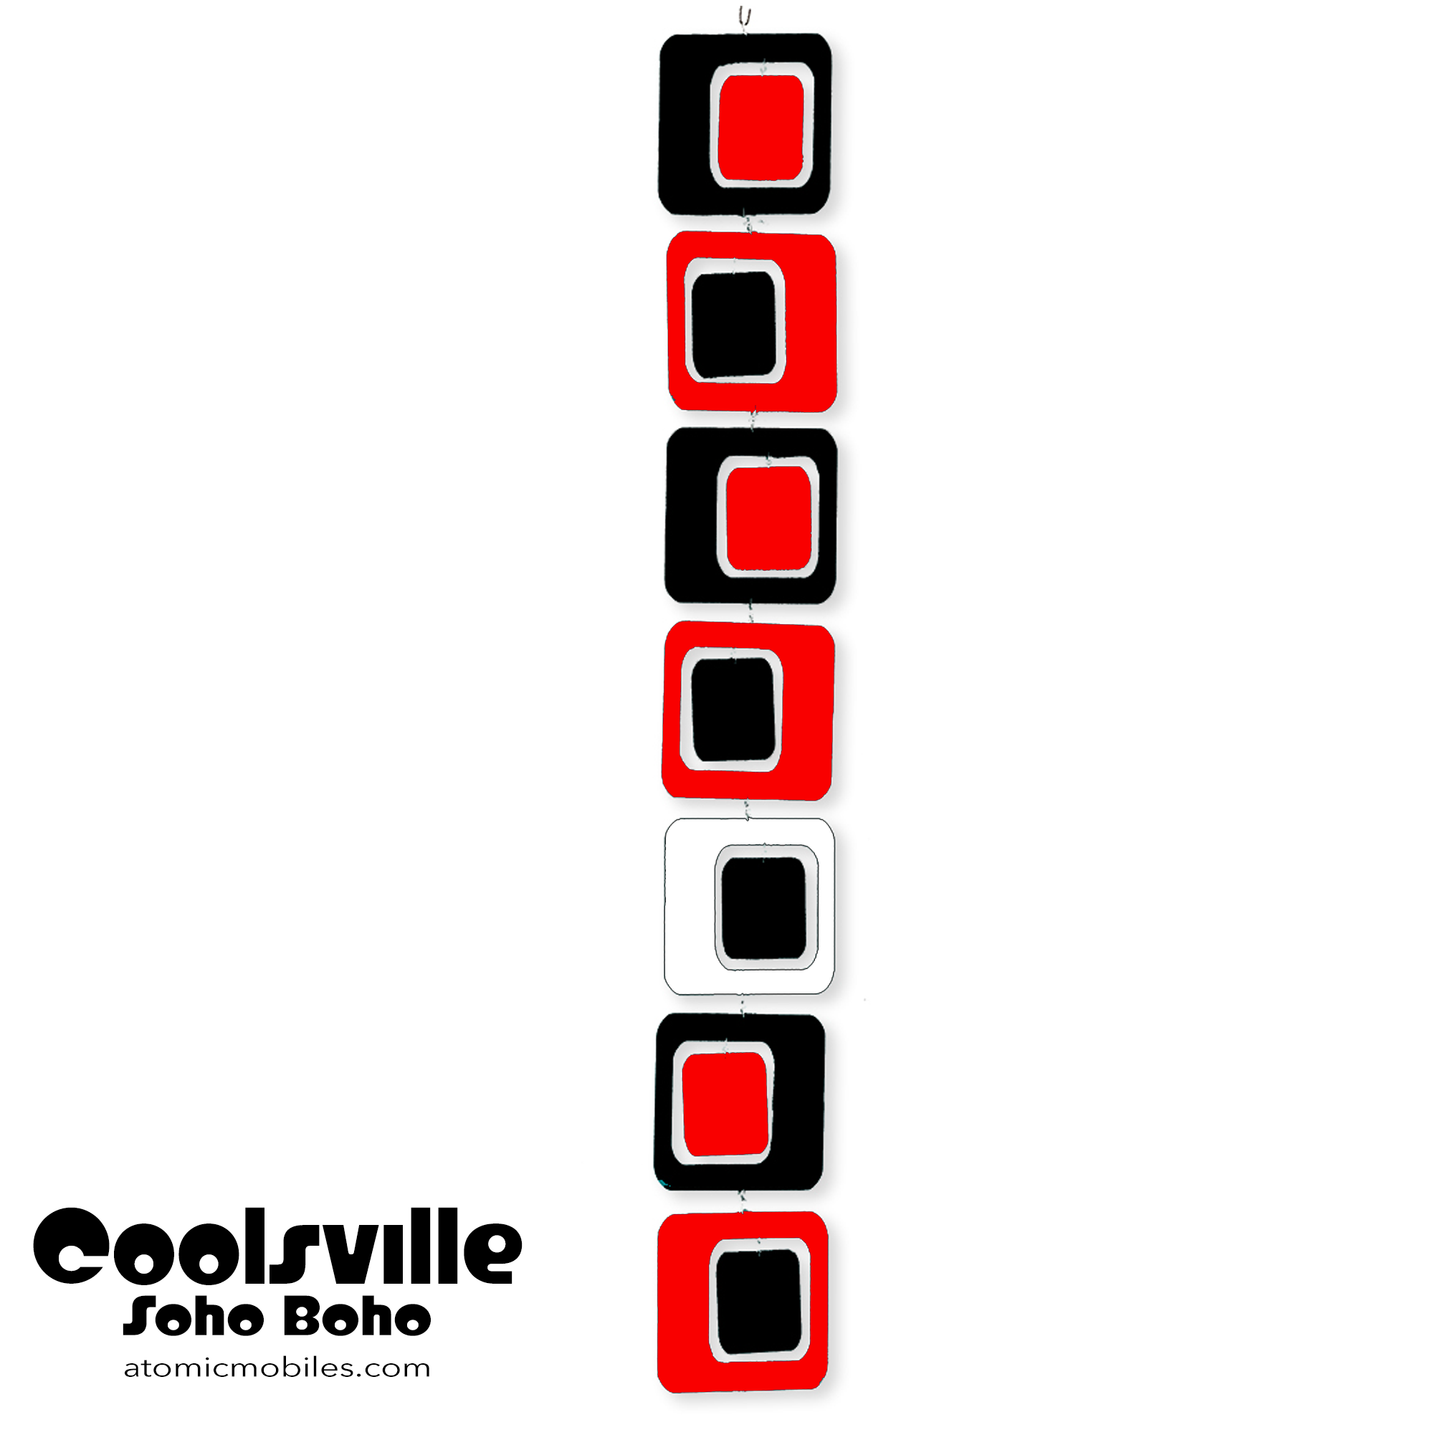 Coolsville kinetic vertical hanging art mobile in SohoBoho colors of Red, Black, and White by AtomicMobiles.com